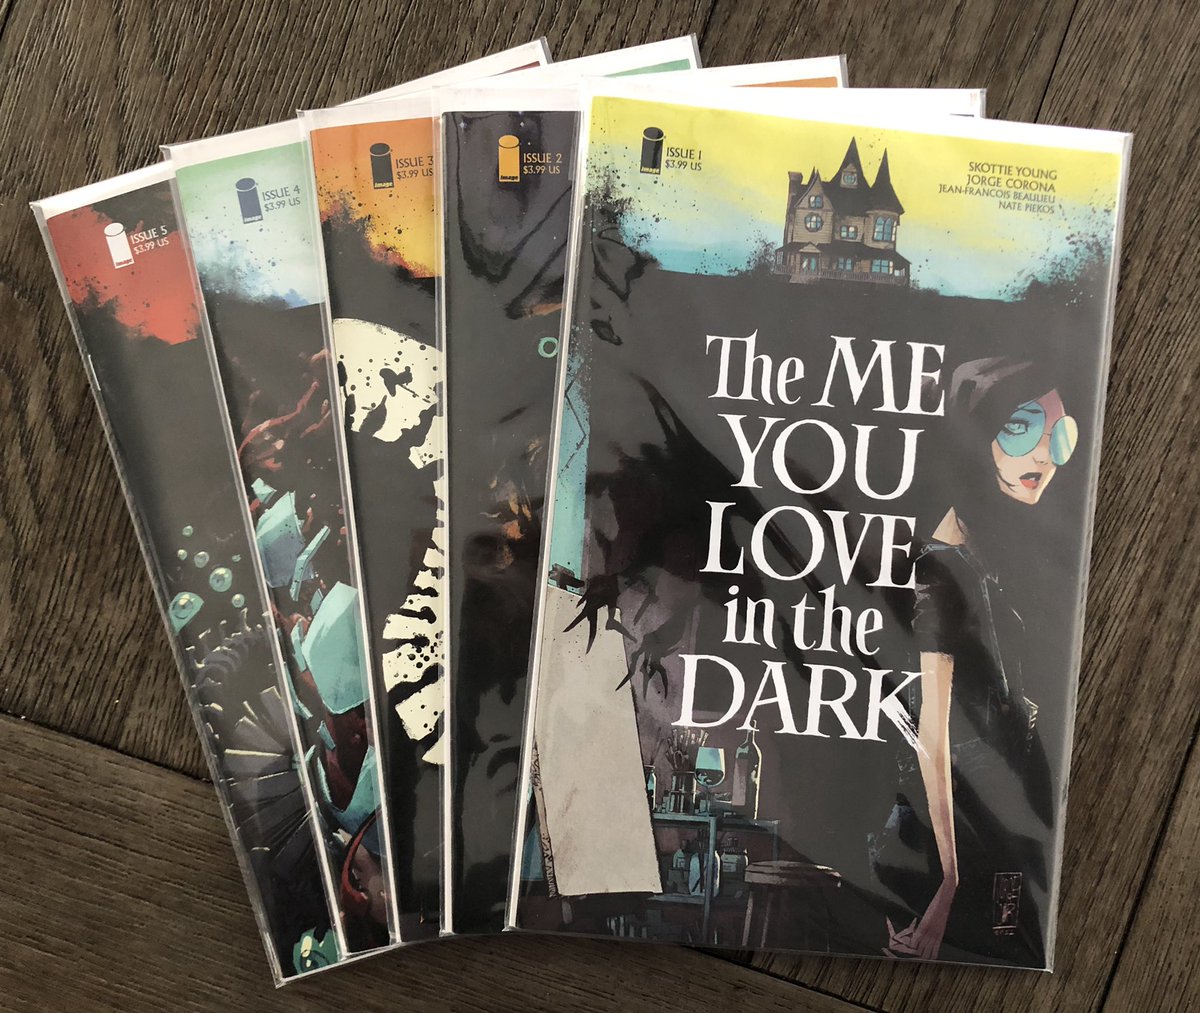 Queued up The Me You Love in the Dark so I could read it all at once.  What a fantastic tale!  One of the creepier haunted house stories I’ve ever read.  Highly recommended.

@skottieyoung @jecorona #JeanFrancoisBeaulieu @blambot @ImageComics